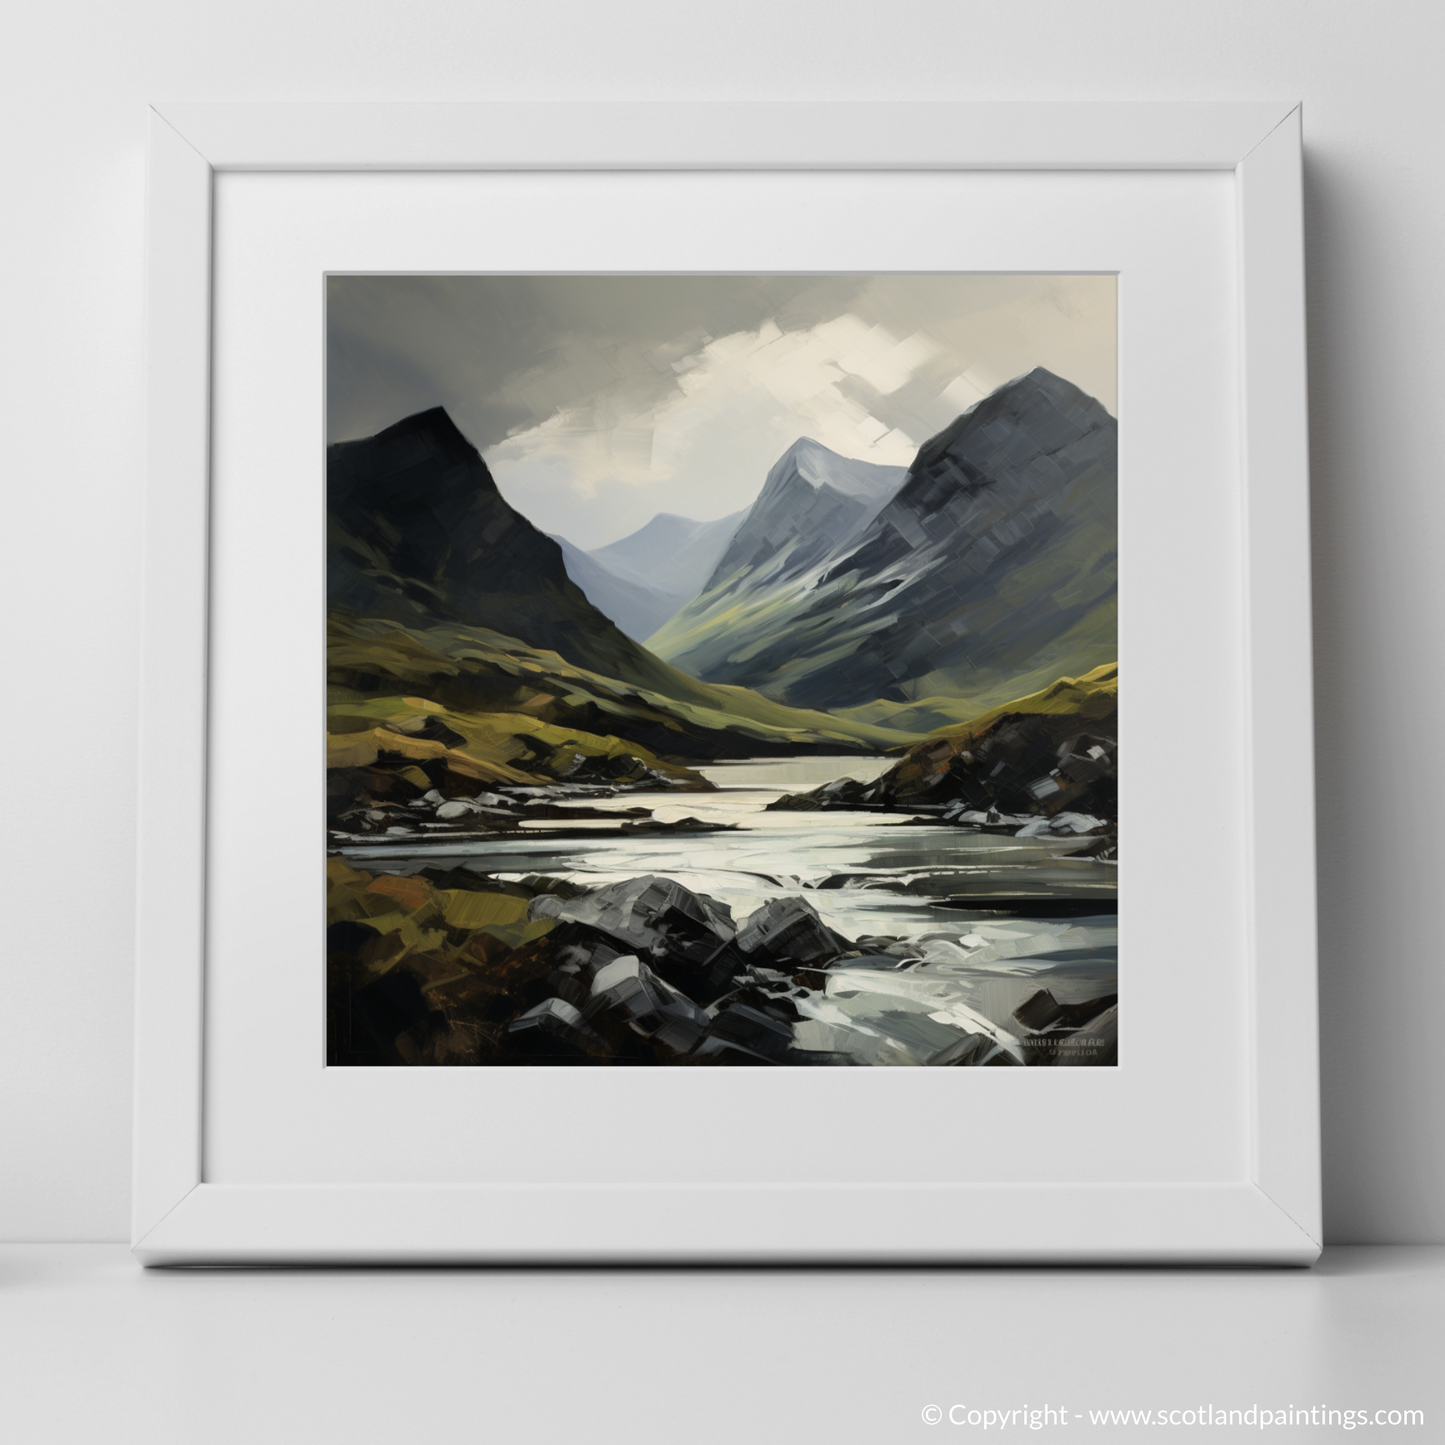 Art Print of Liathach, Wester Ross with a white frame